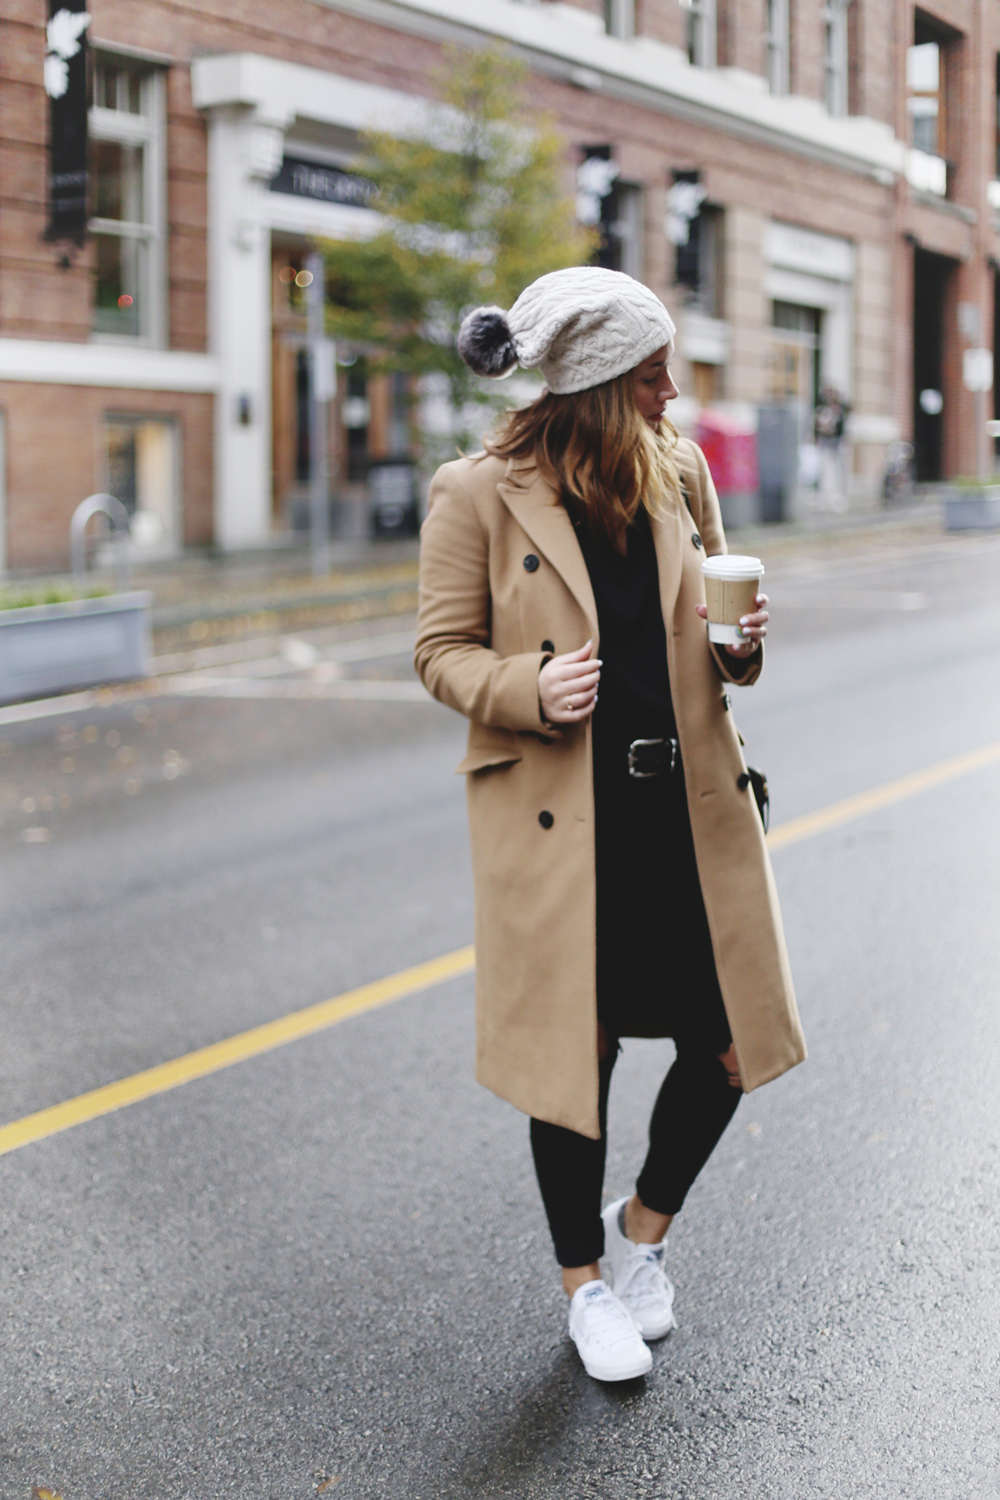 To Vogue or Bust shares ways to style your converse sneakers in white Converse All Stars, Aritzia camel coat, James Jeans black skinny jeans, Aritzia black leather bag and a Tilley Hats beanie